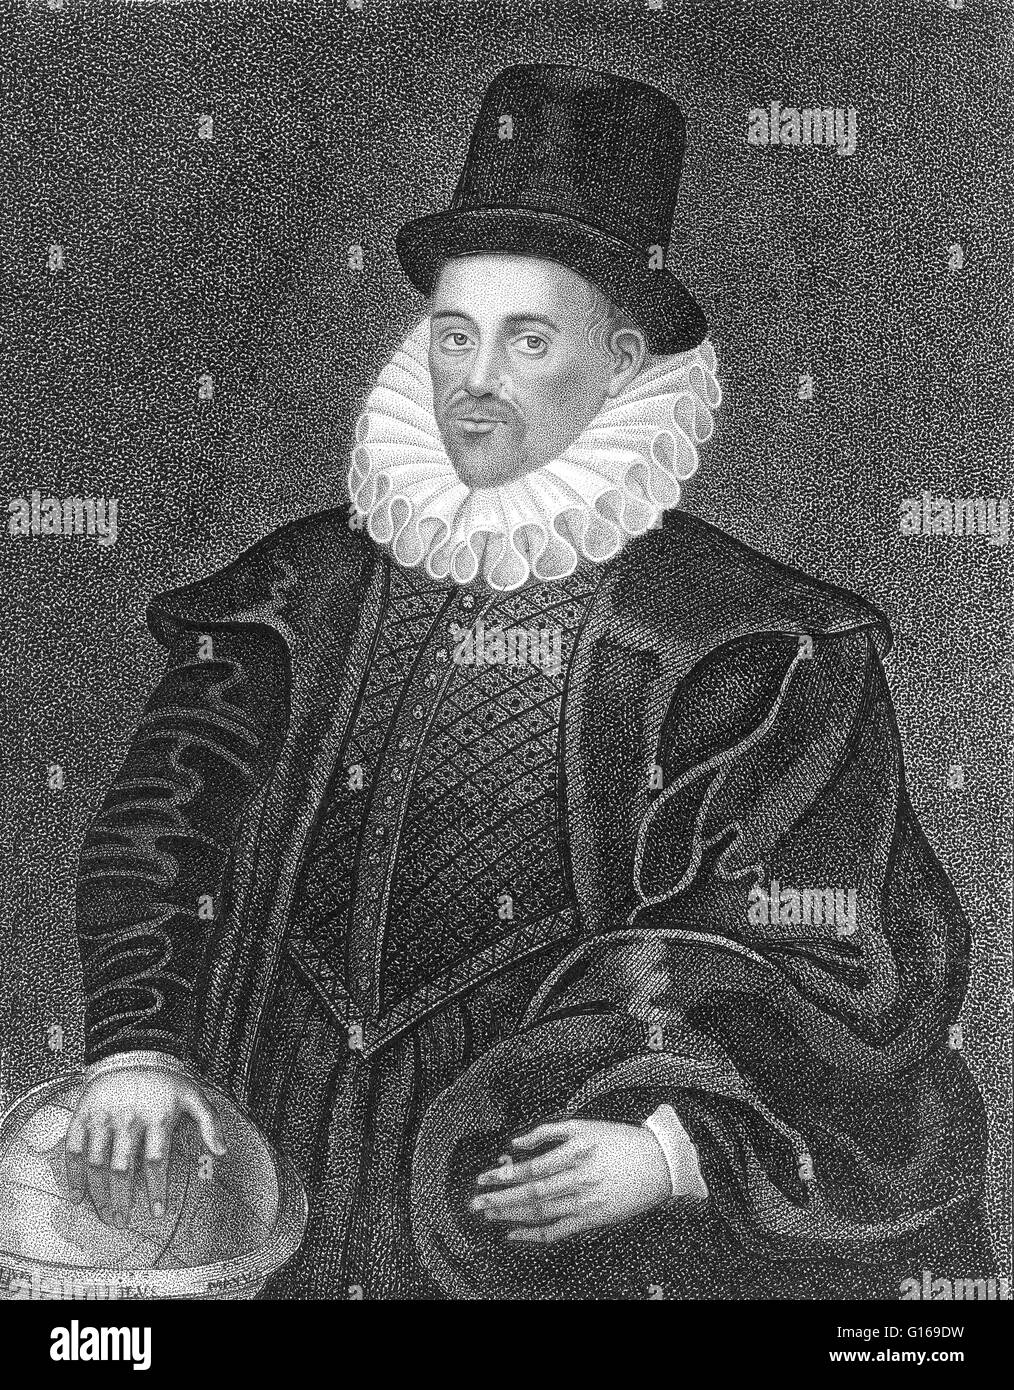 William Gilbert (May 24, 1544 - November 30, 1603) was an English physician, physicist and natural philosopher. He is regarded by some as the father of electrical engineering. His primary scientific work was De Magnete, Magneticisque Corporibus, et de Mag Stock Photo